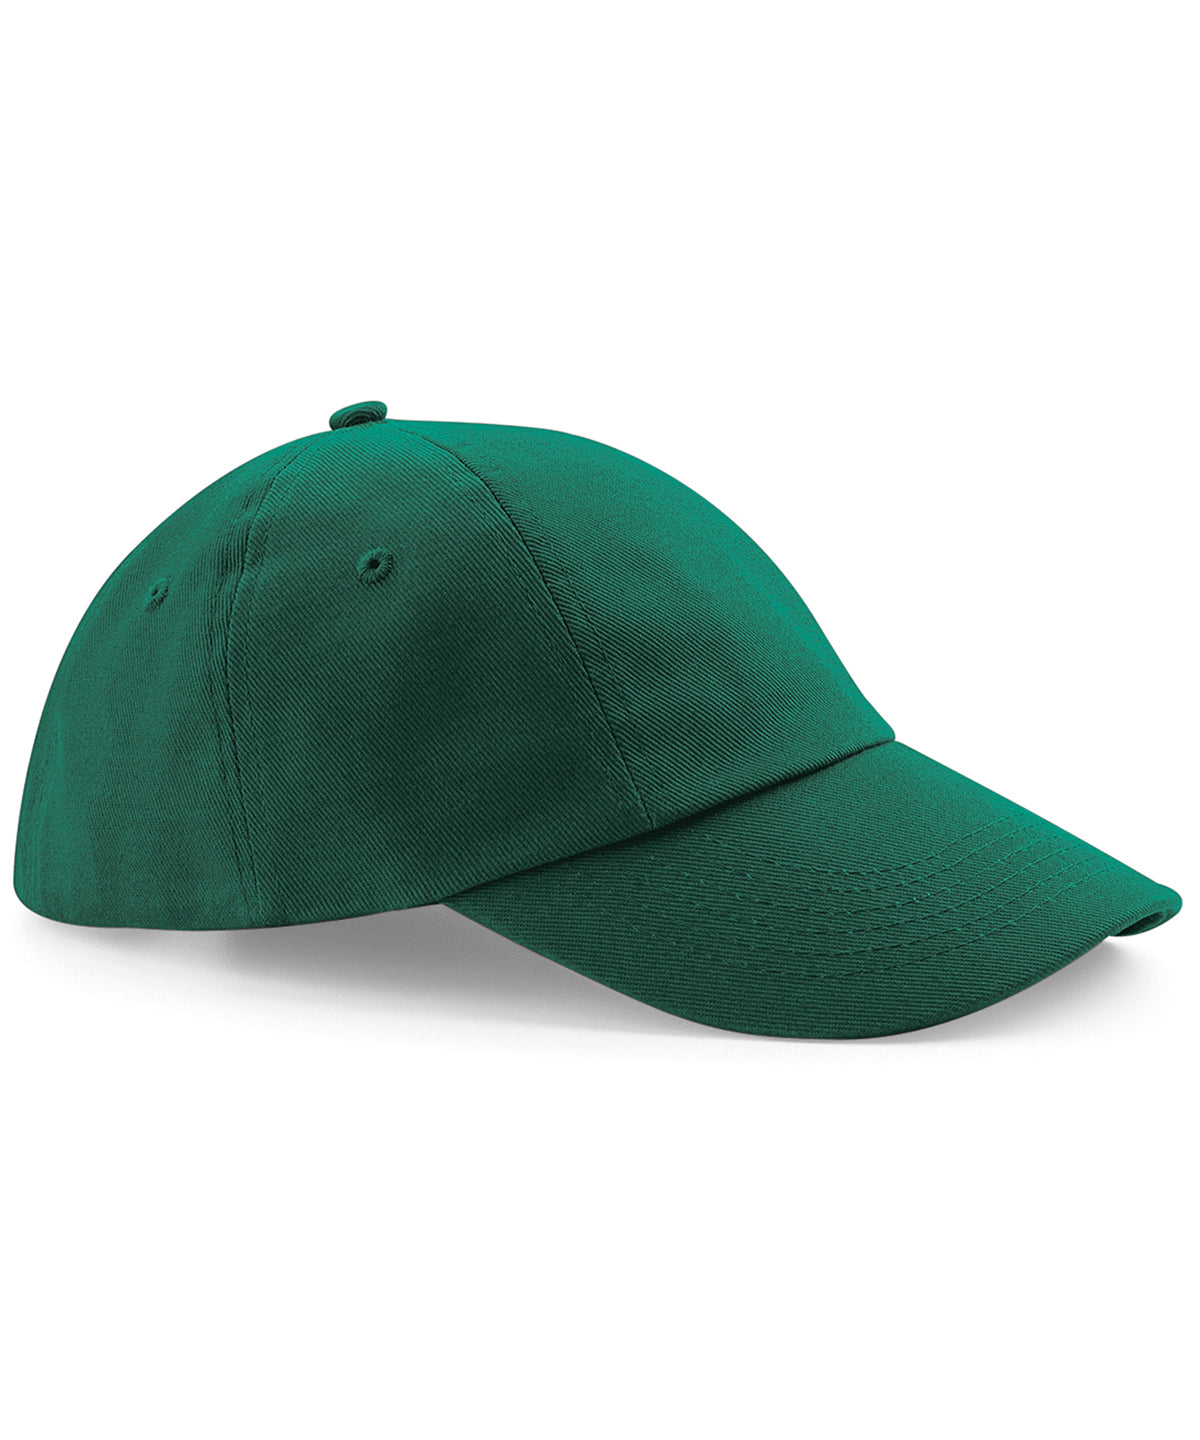 Personalised Caps - Bottle Beechfield Low-profile heavy cotton drill cap